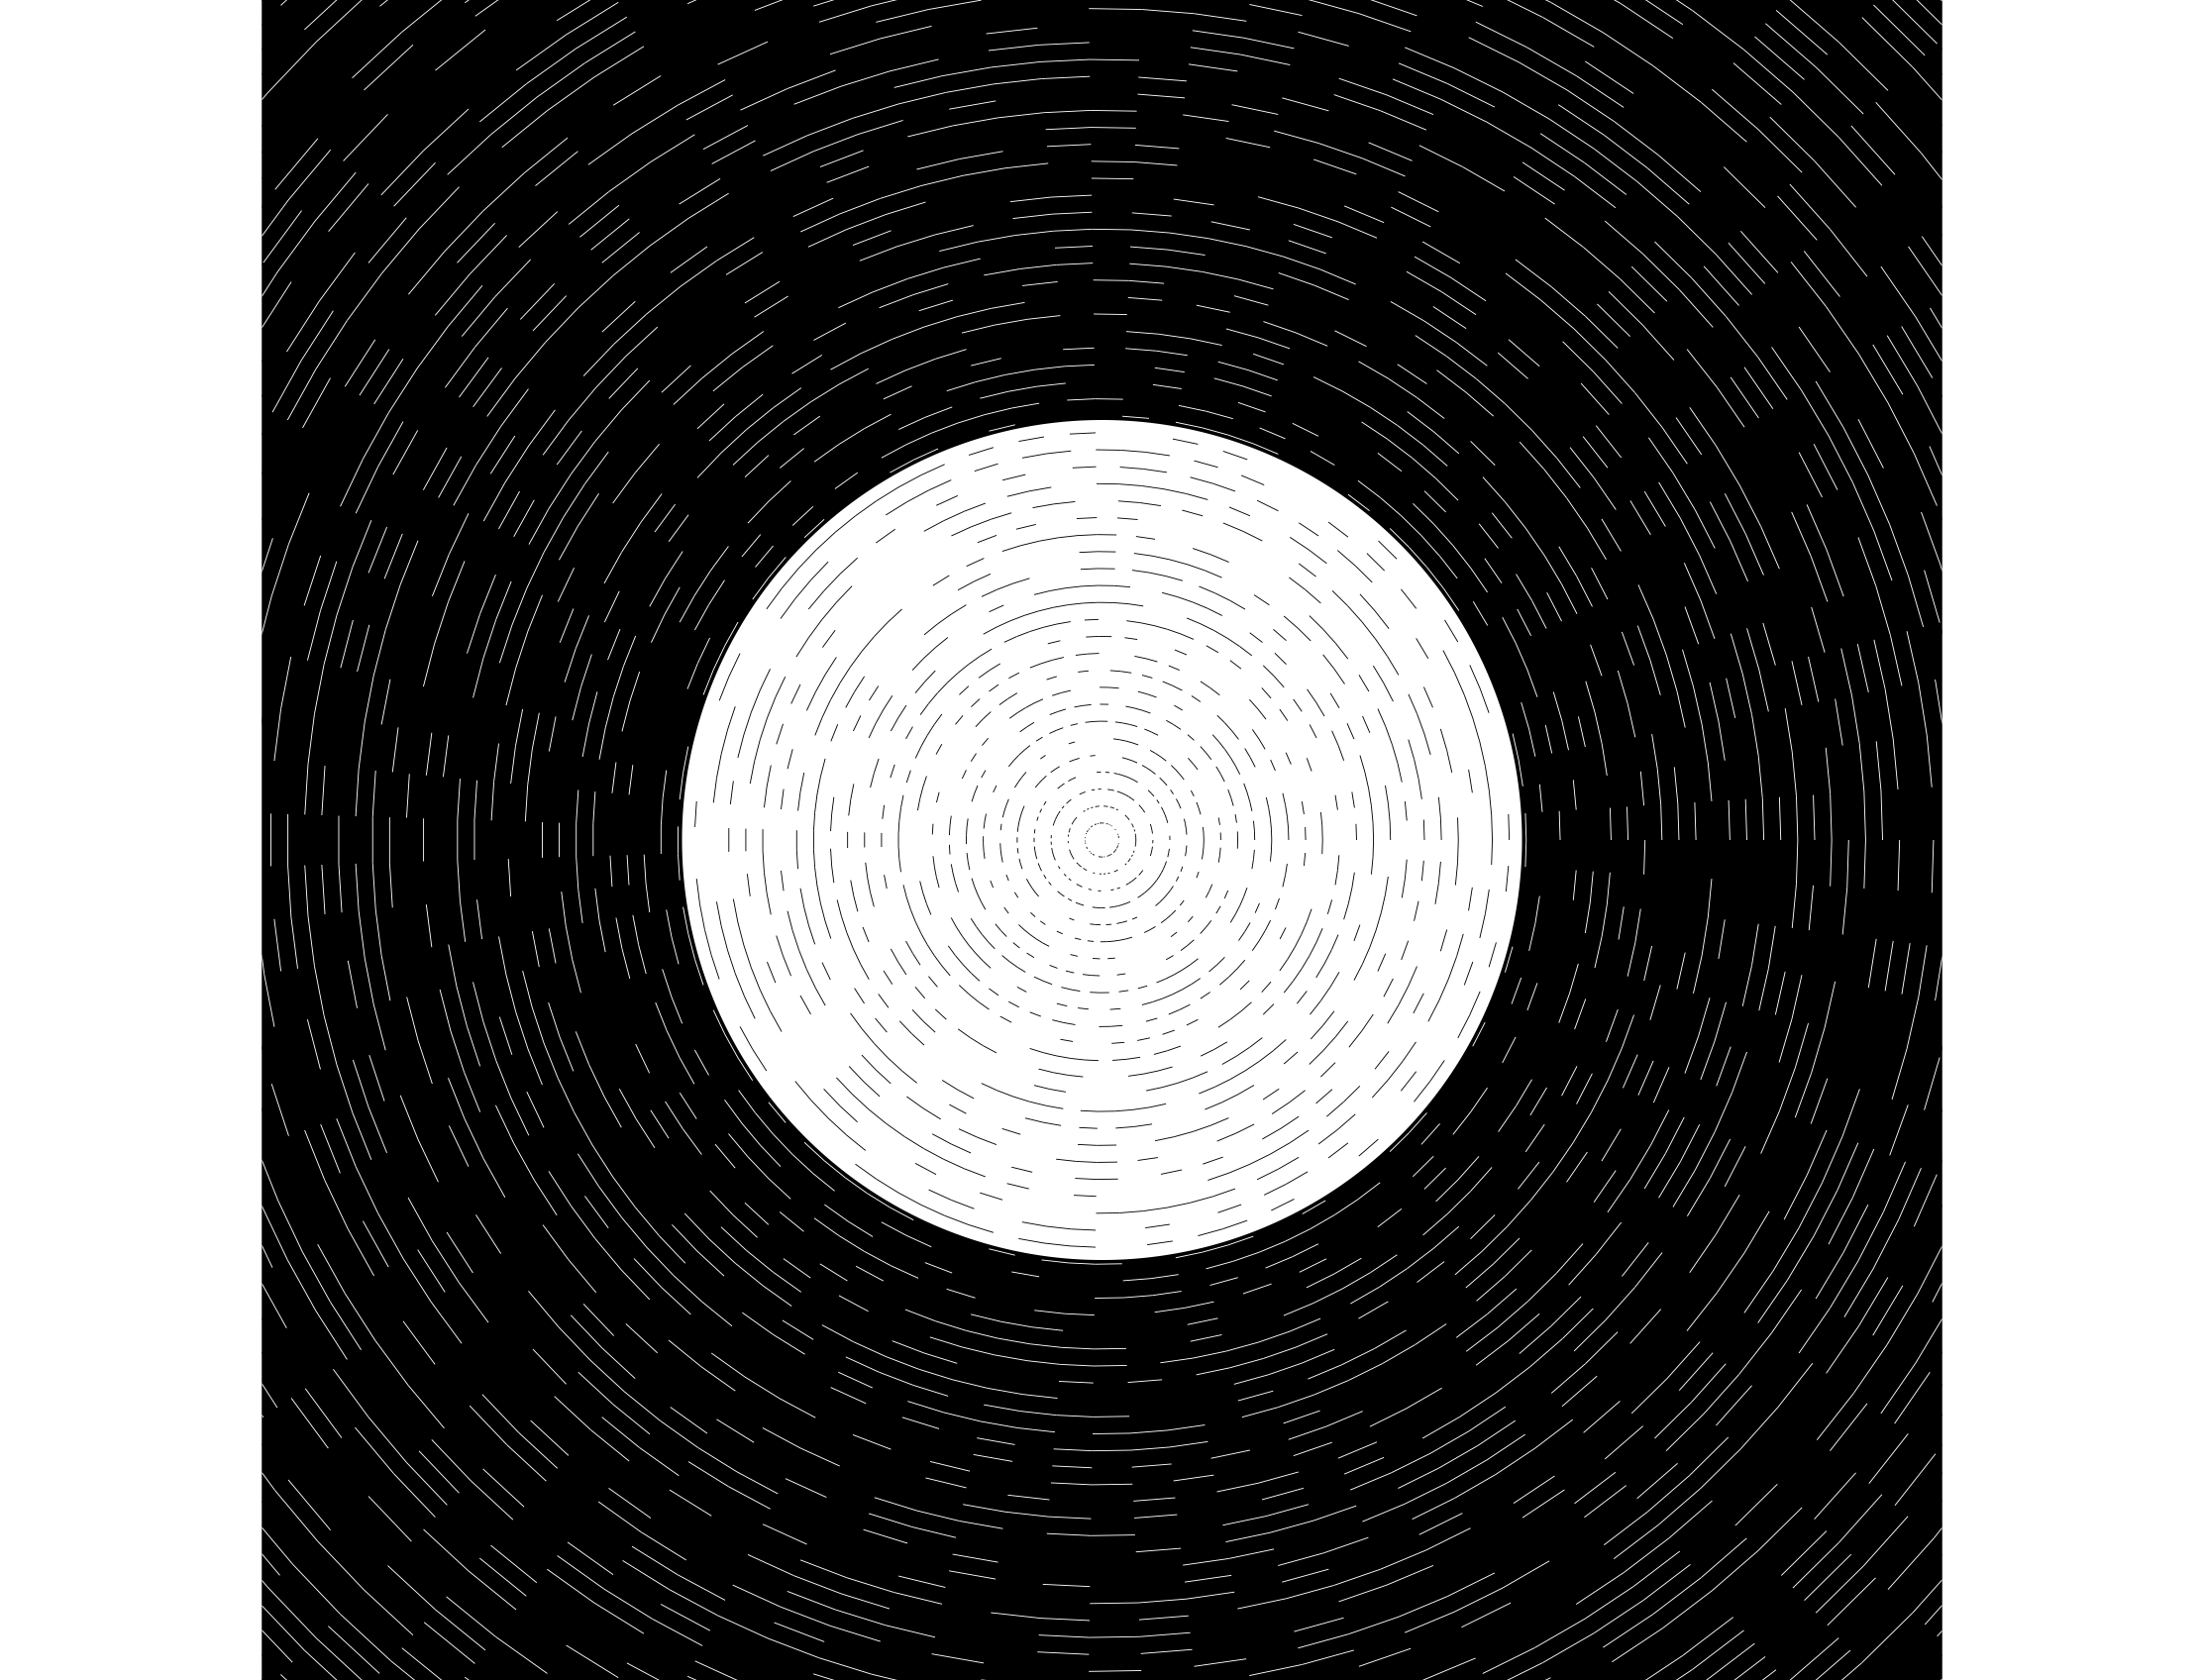 A generative image of a white moon in a black night sky. The moon has simple circular lined patterns. The night sky has a similar circular pattern but in white.